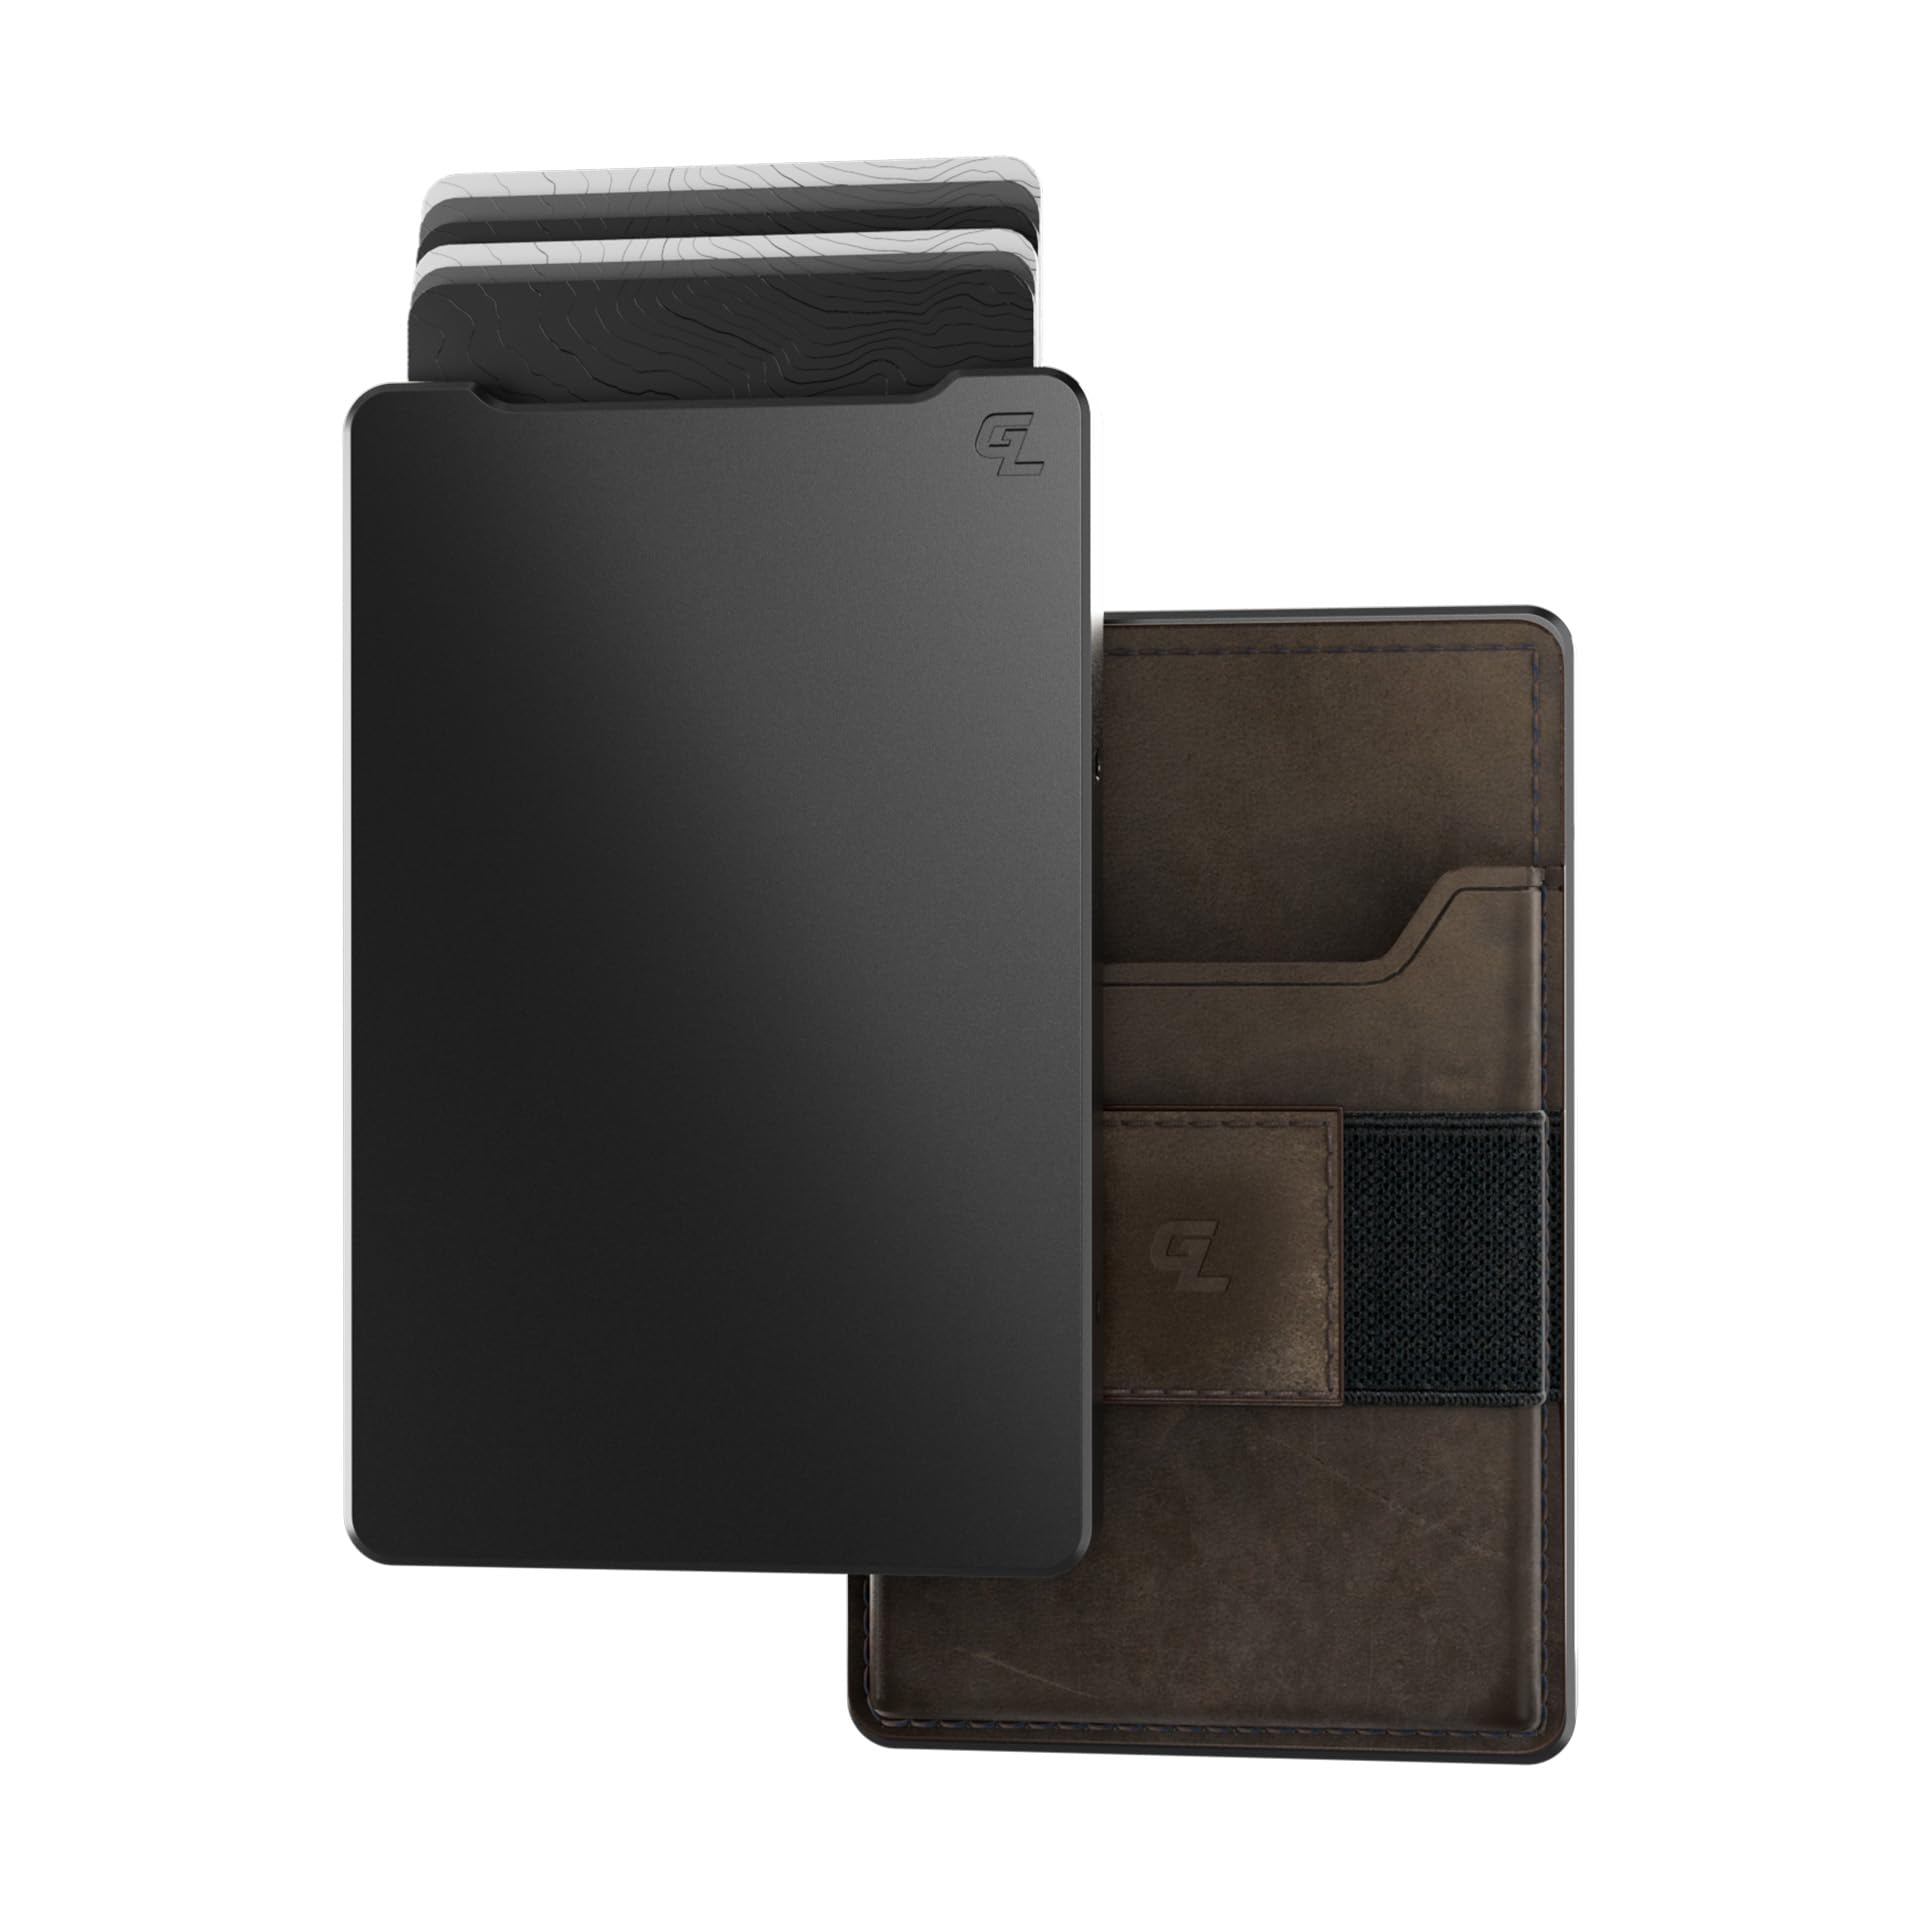 Groove Life Groove Wallet Gun Metal/Brown Leather Go Mens Minimalist Aluminum Credit Card Holder, Magnetic Thumb Swipe, RFID Blocking, Magsafe, Genuine Leather Attachment, Lifetime Coverage